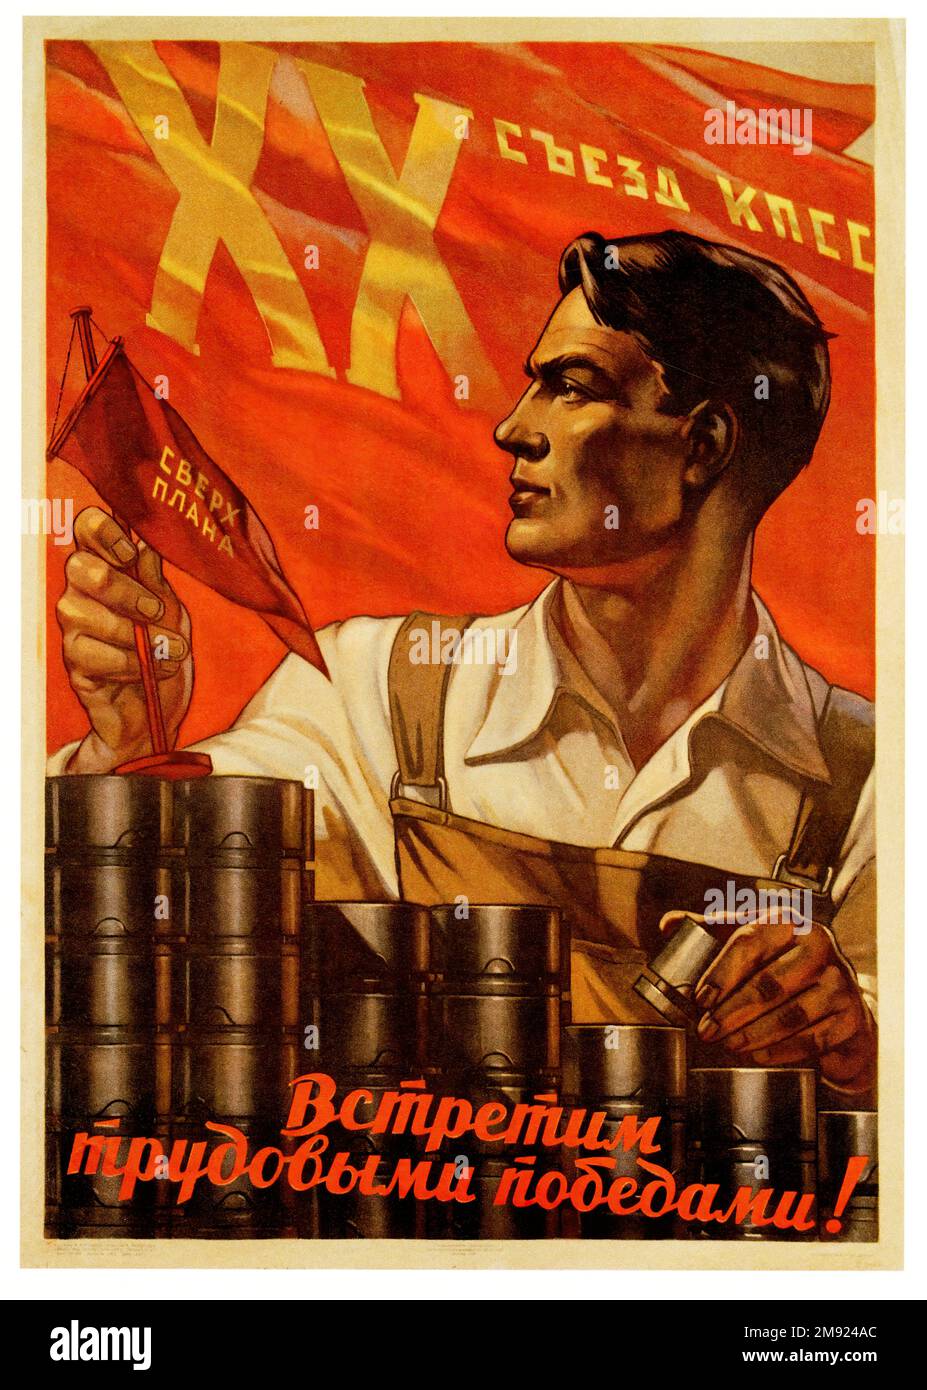 We Will Deliver Labor Victories for the 20th Congress of the Communist Party of the Ussr   -  (Translated from Russian) - Vintage USSR soviet propaganda poster Stock Photo